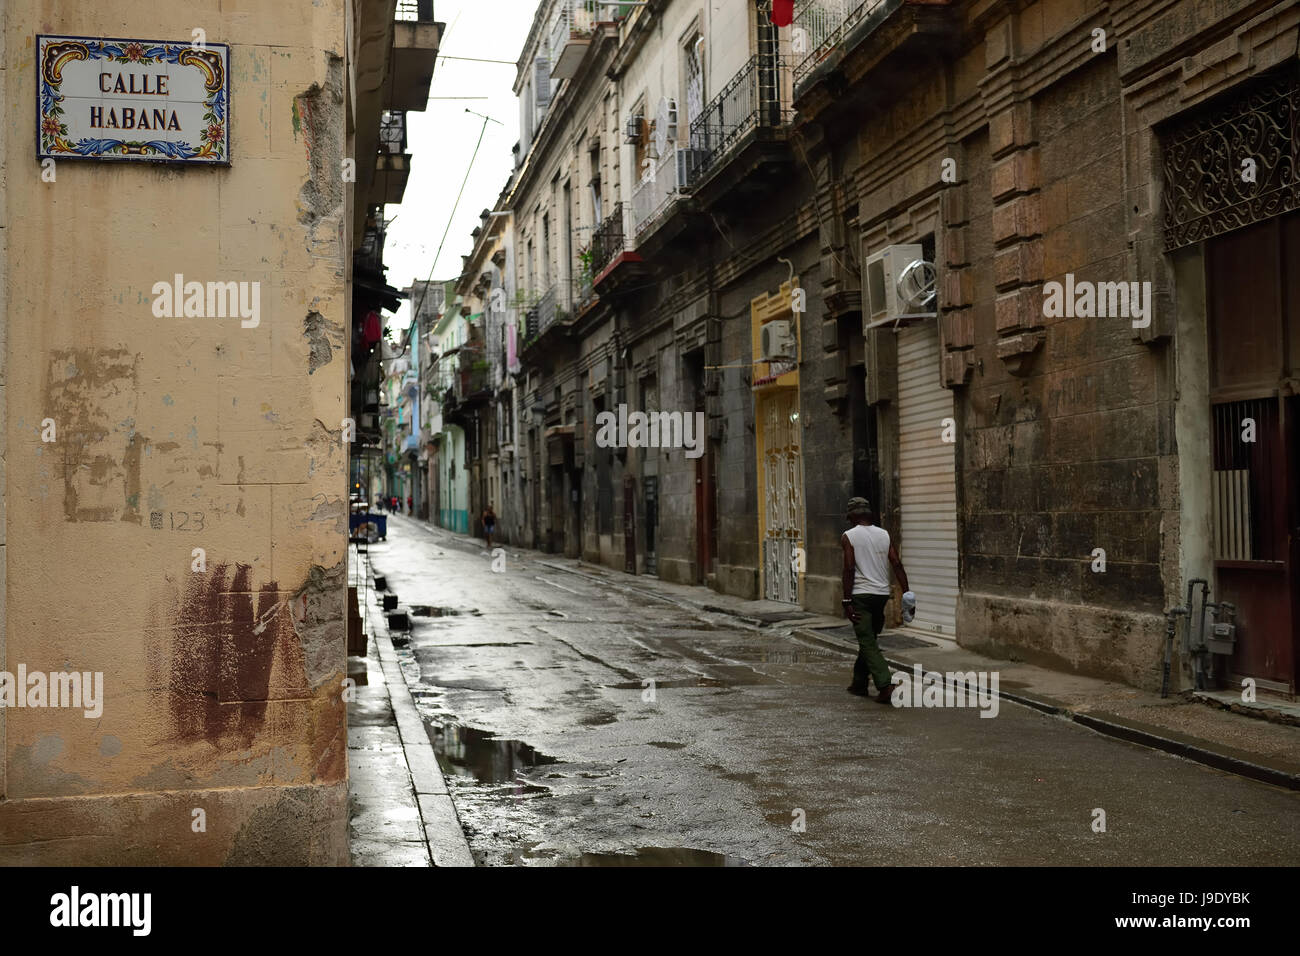 The old town in the heart of the old part of Havana on Cuba Stock Photo